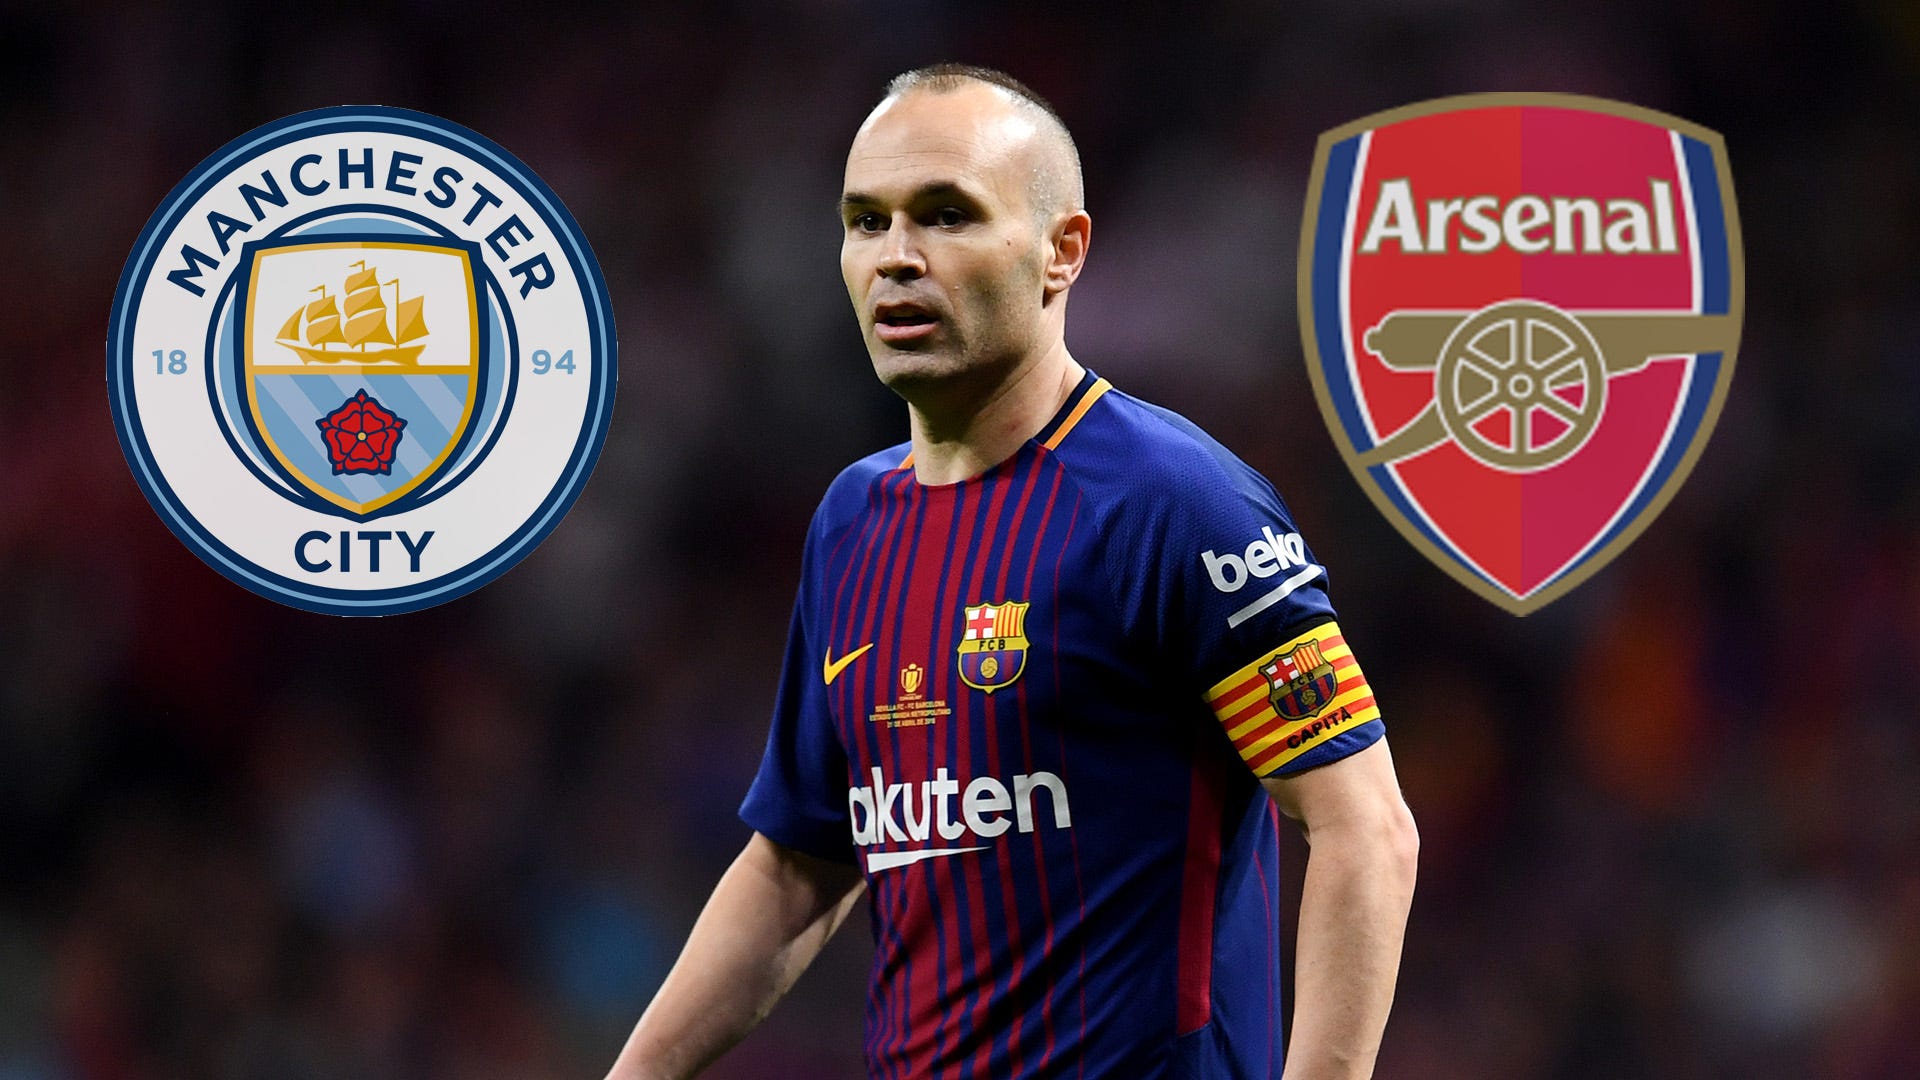 Transfer news and rumours LIVE Man City and Arsenal battle for Iniesta Goal